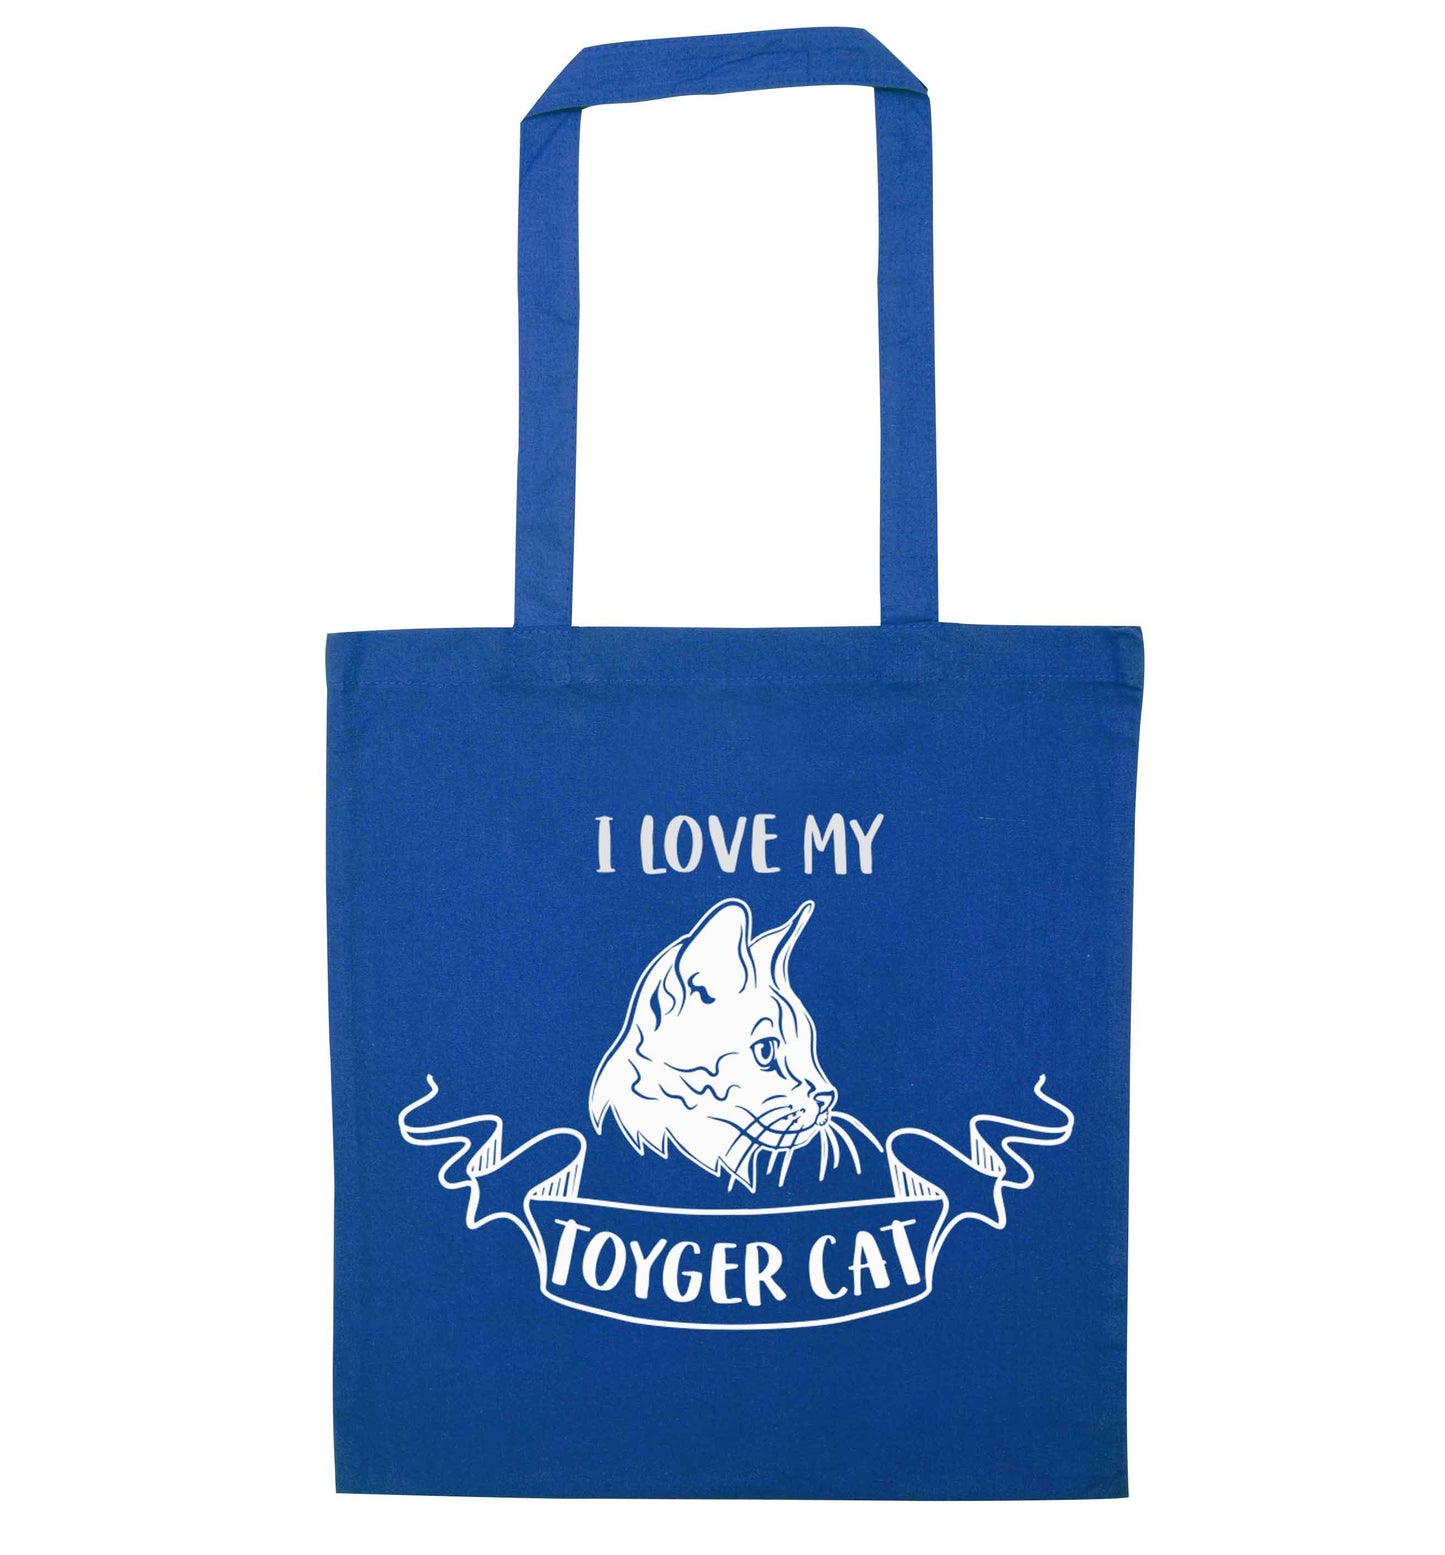 I love my toyger cat blue tote bag